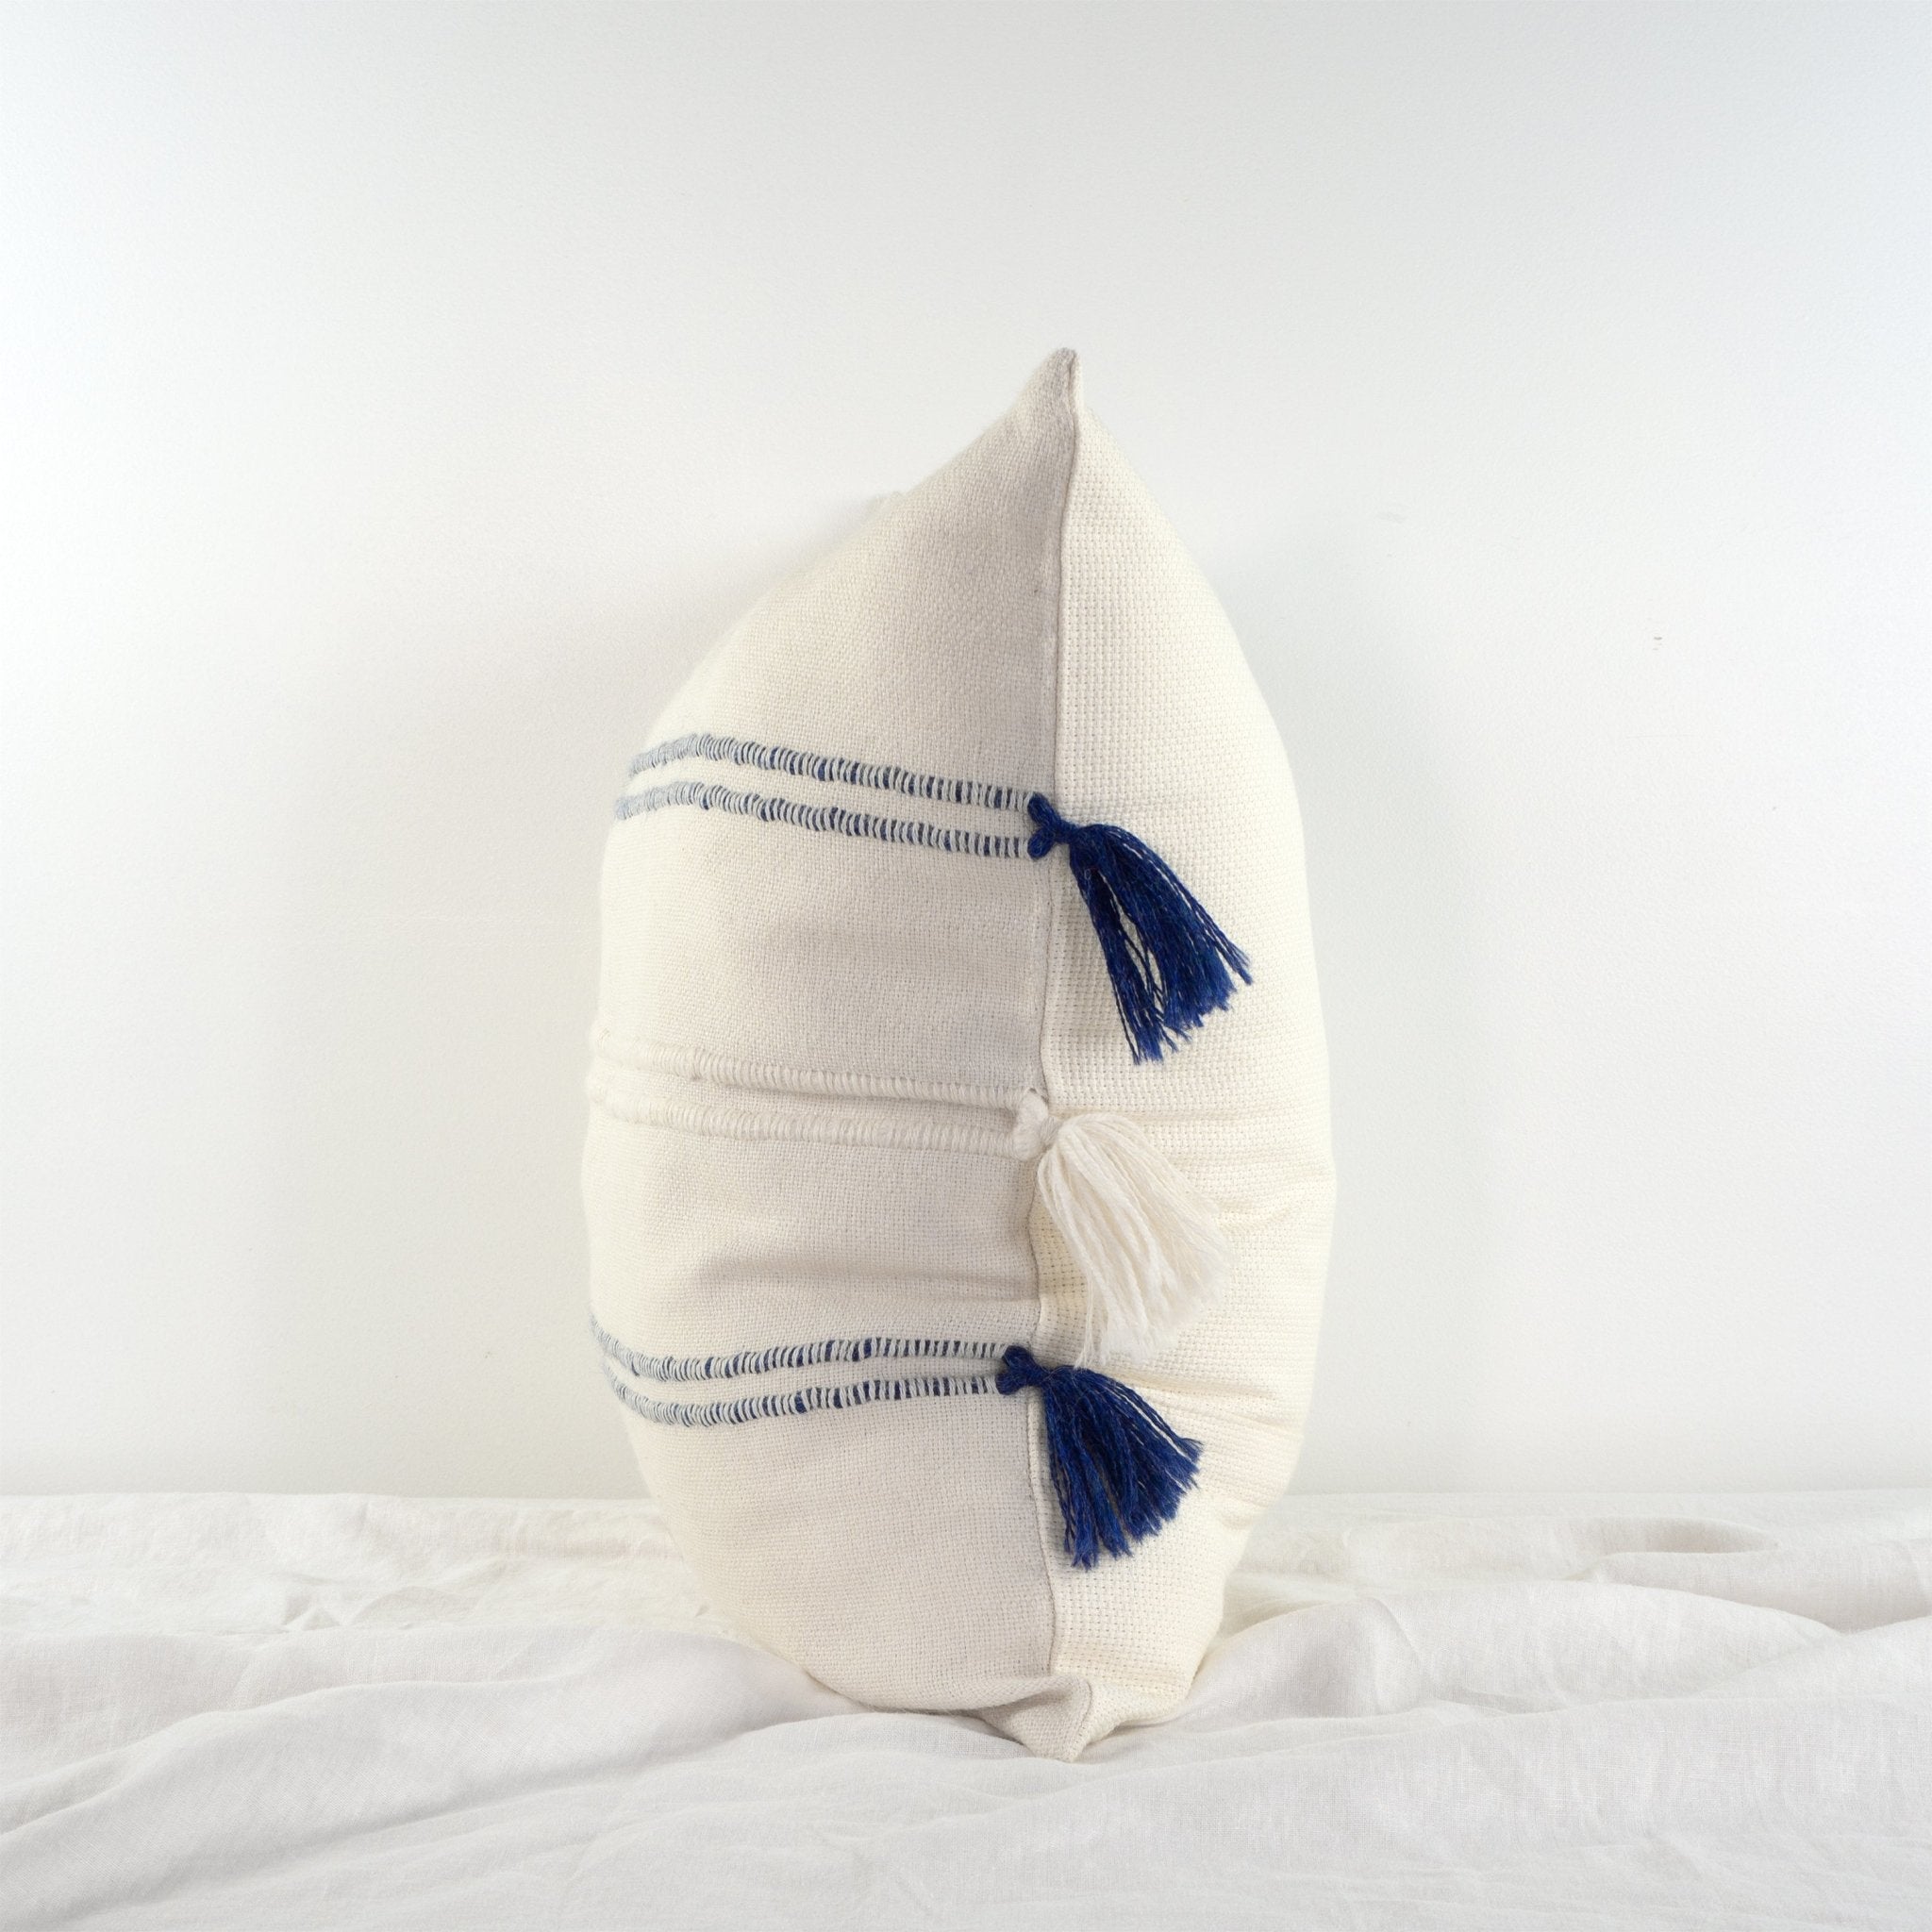 Handwoven white and navy blue baby alpaca cushion from Peru on a table side on